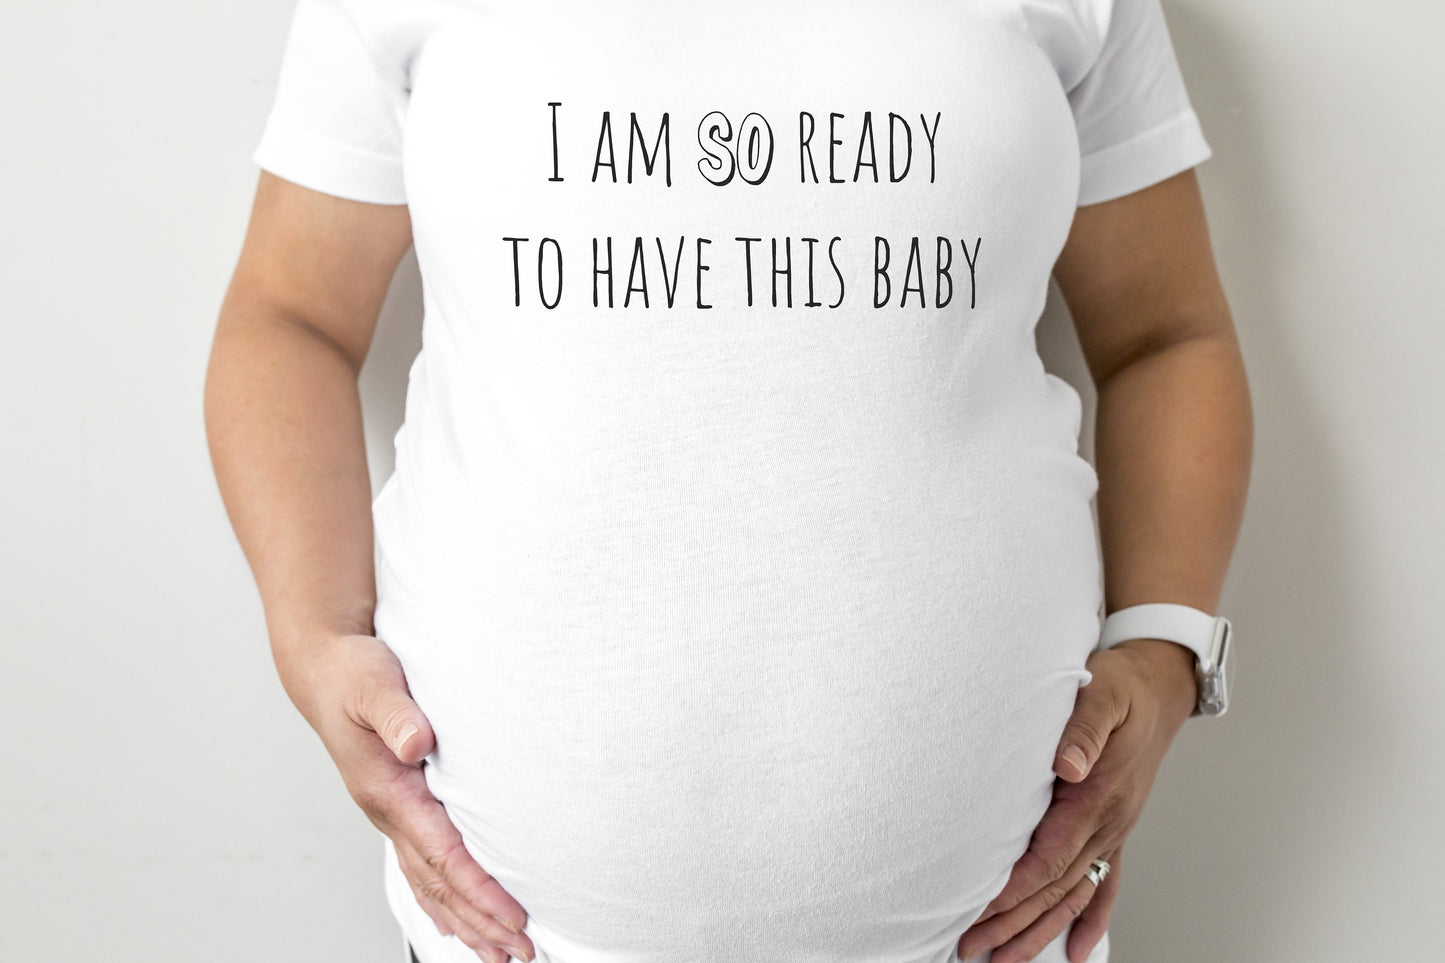 I am SO ready to have this baby Maternity T-Shirt - maternity cut shirt with ruched sides - funny pregnancy shirt - funny maternity tee